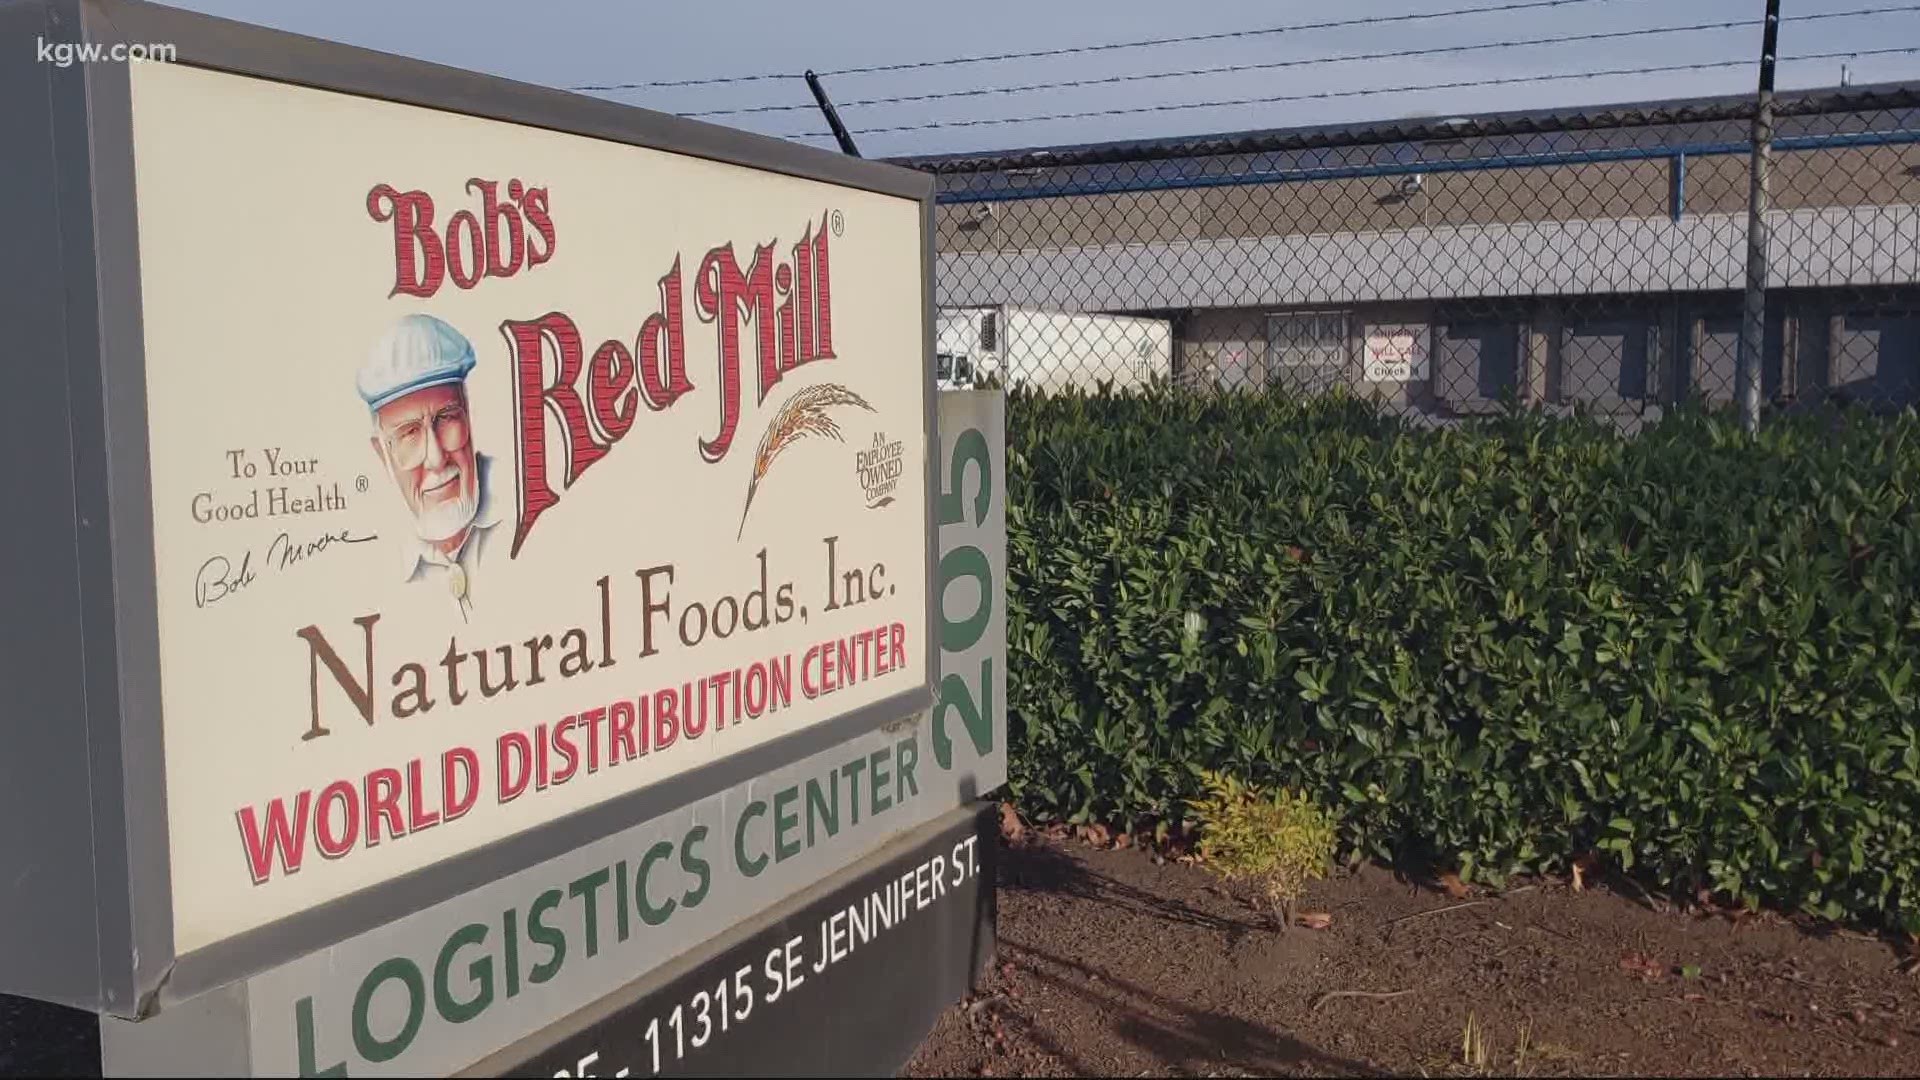 19 employees at Bob's Red mill in Milwaukie test positive for coronavirus